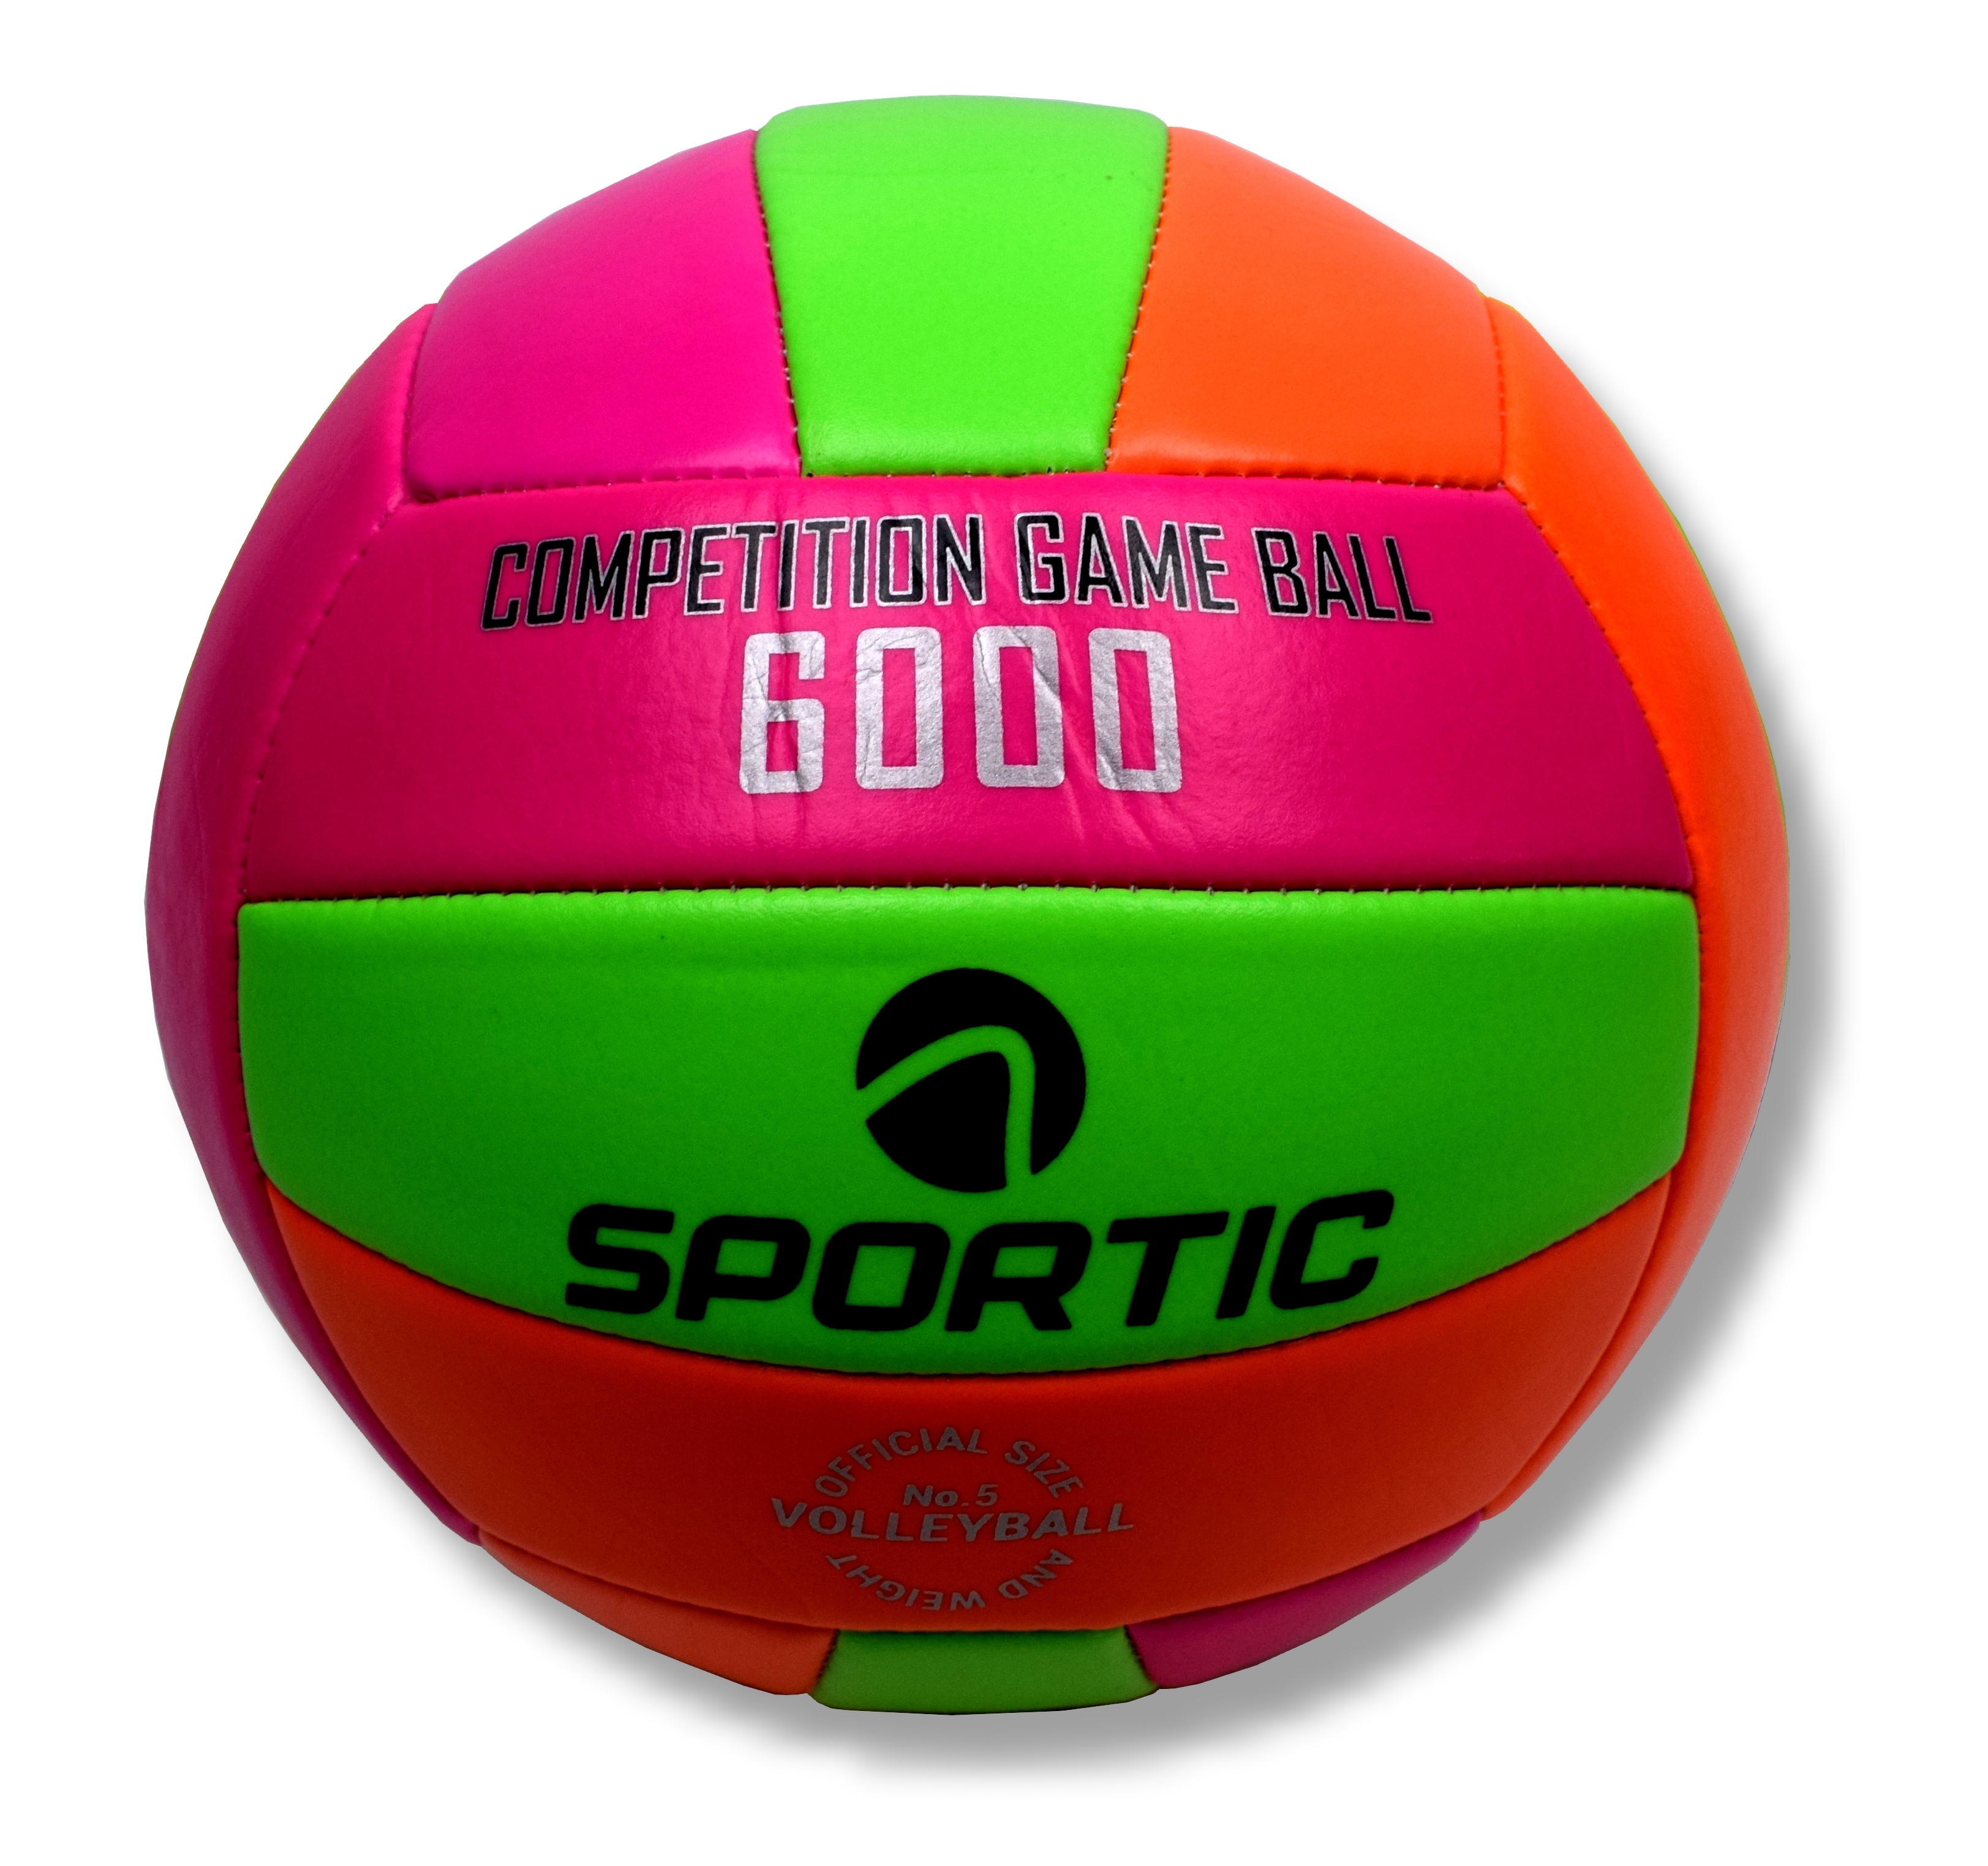 Volleyball, official size and weight